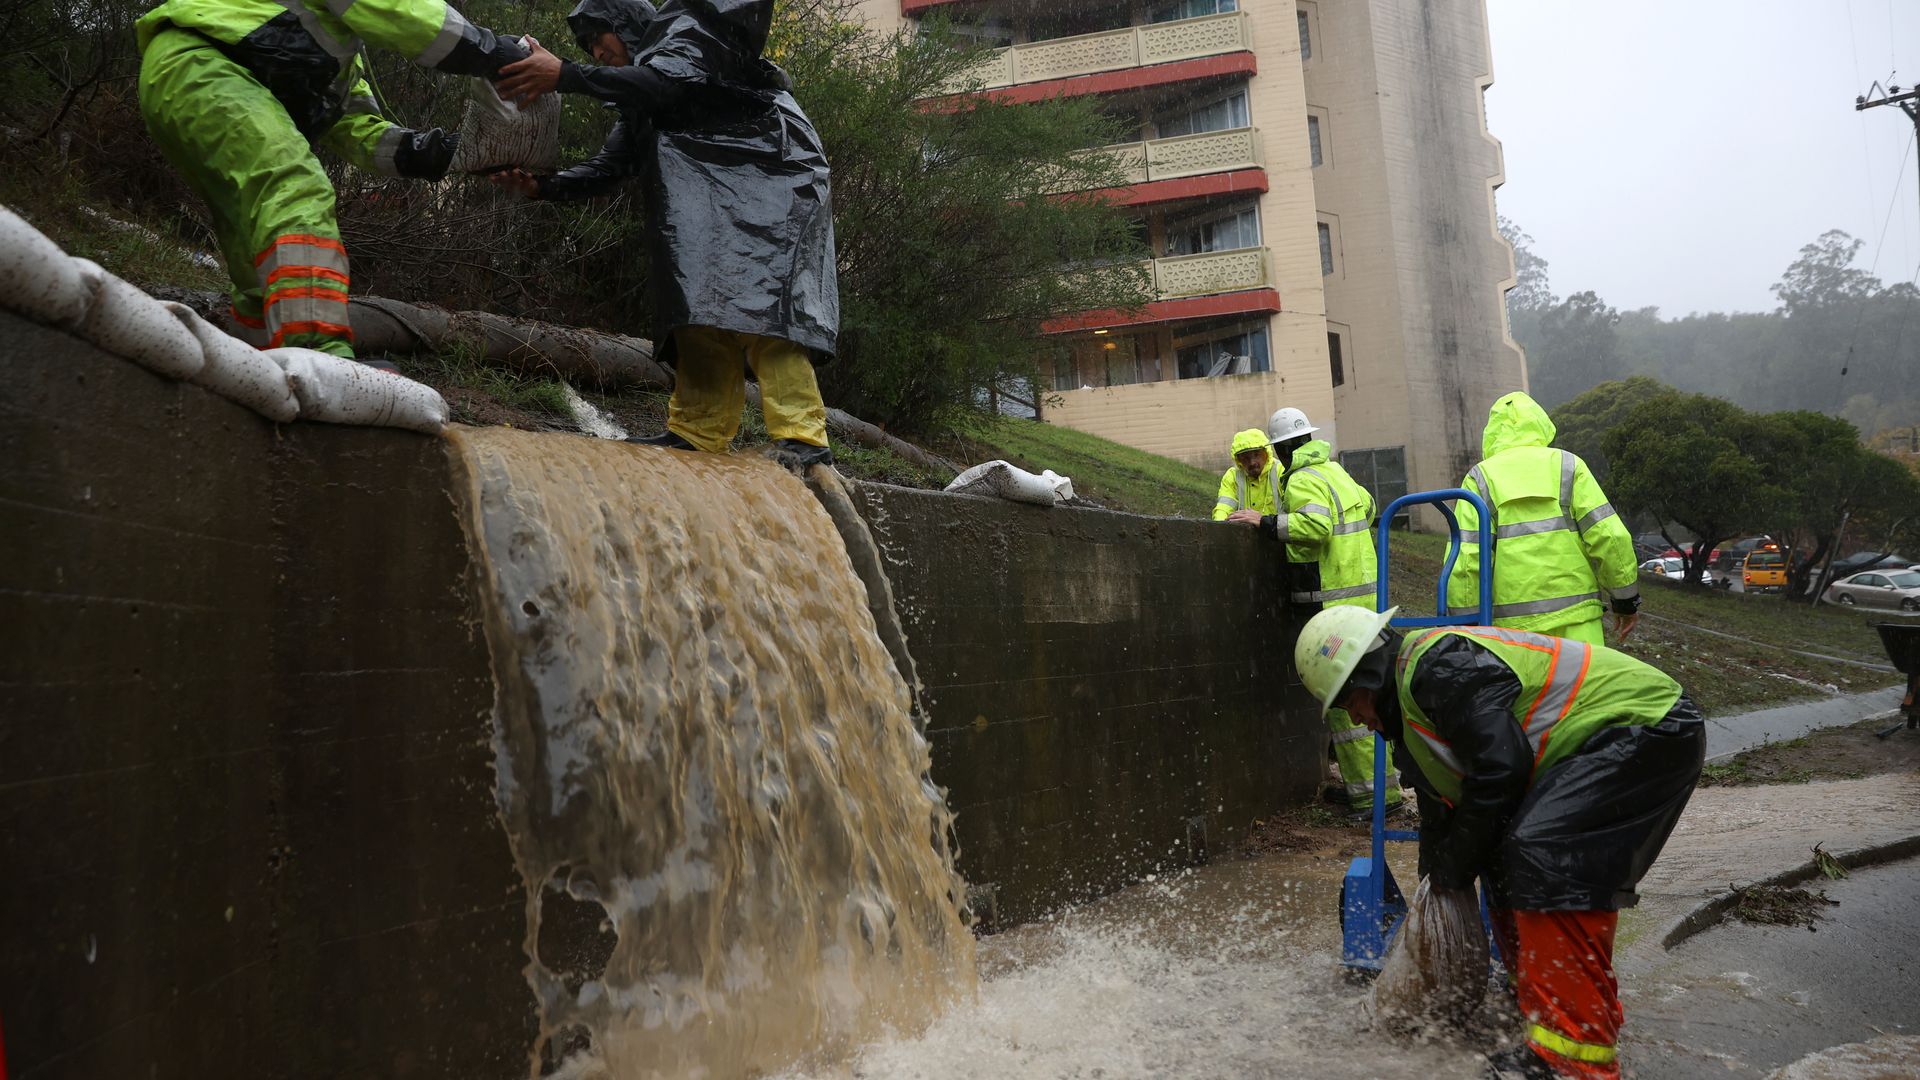  Workers try to divert water into drains as rain pours down on October 24, 2021 in Marin City, California. 